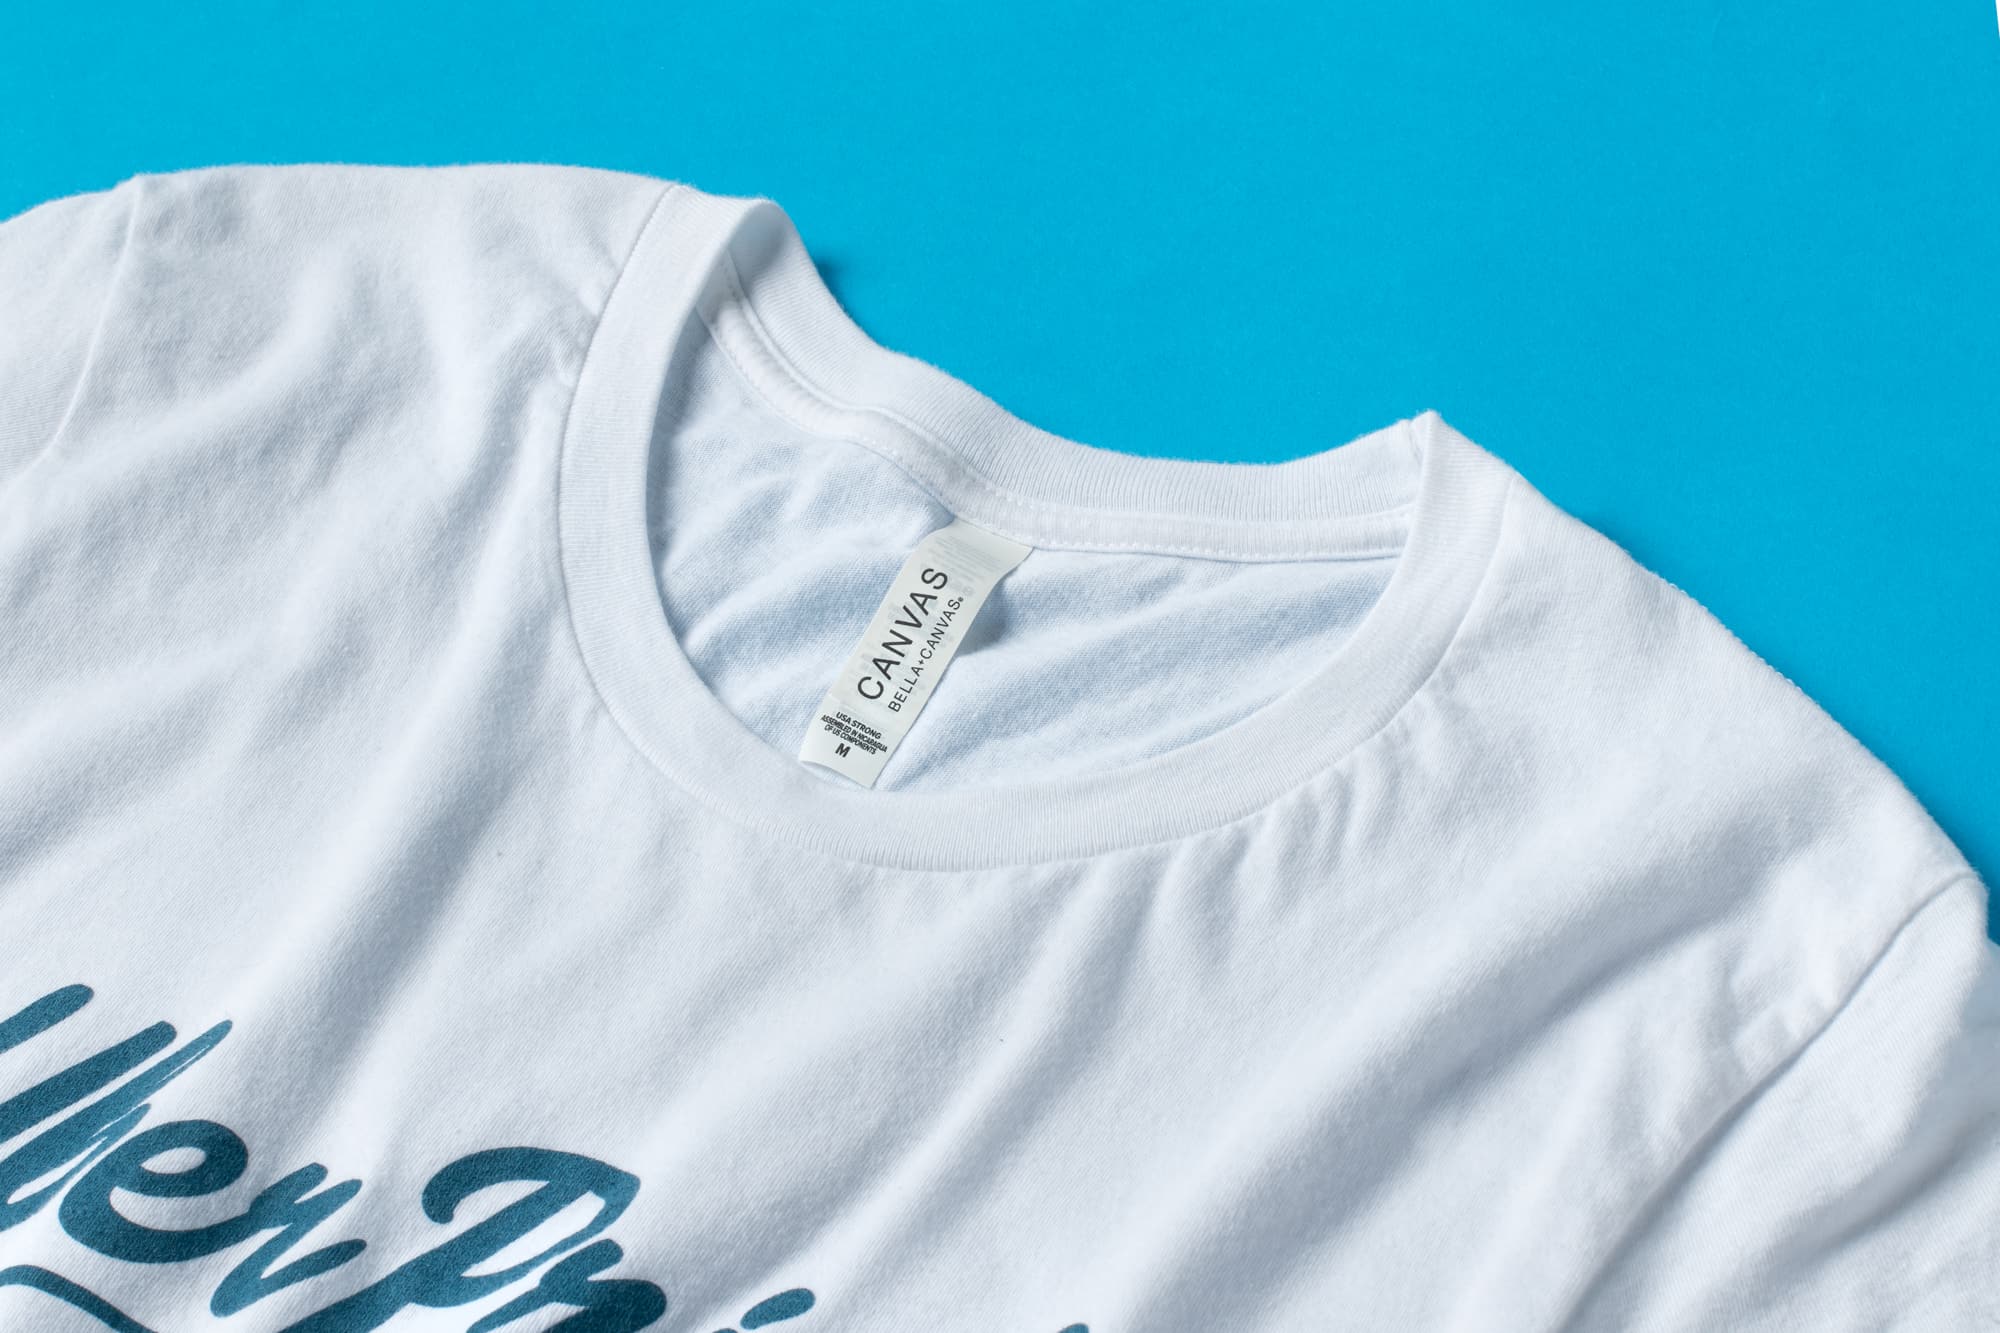 A detail view of the collar of the Premium Tee to show material